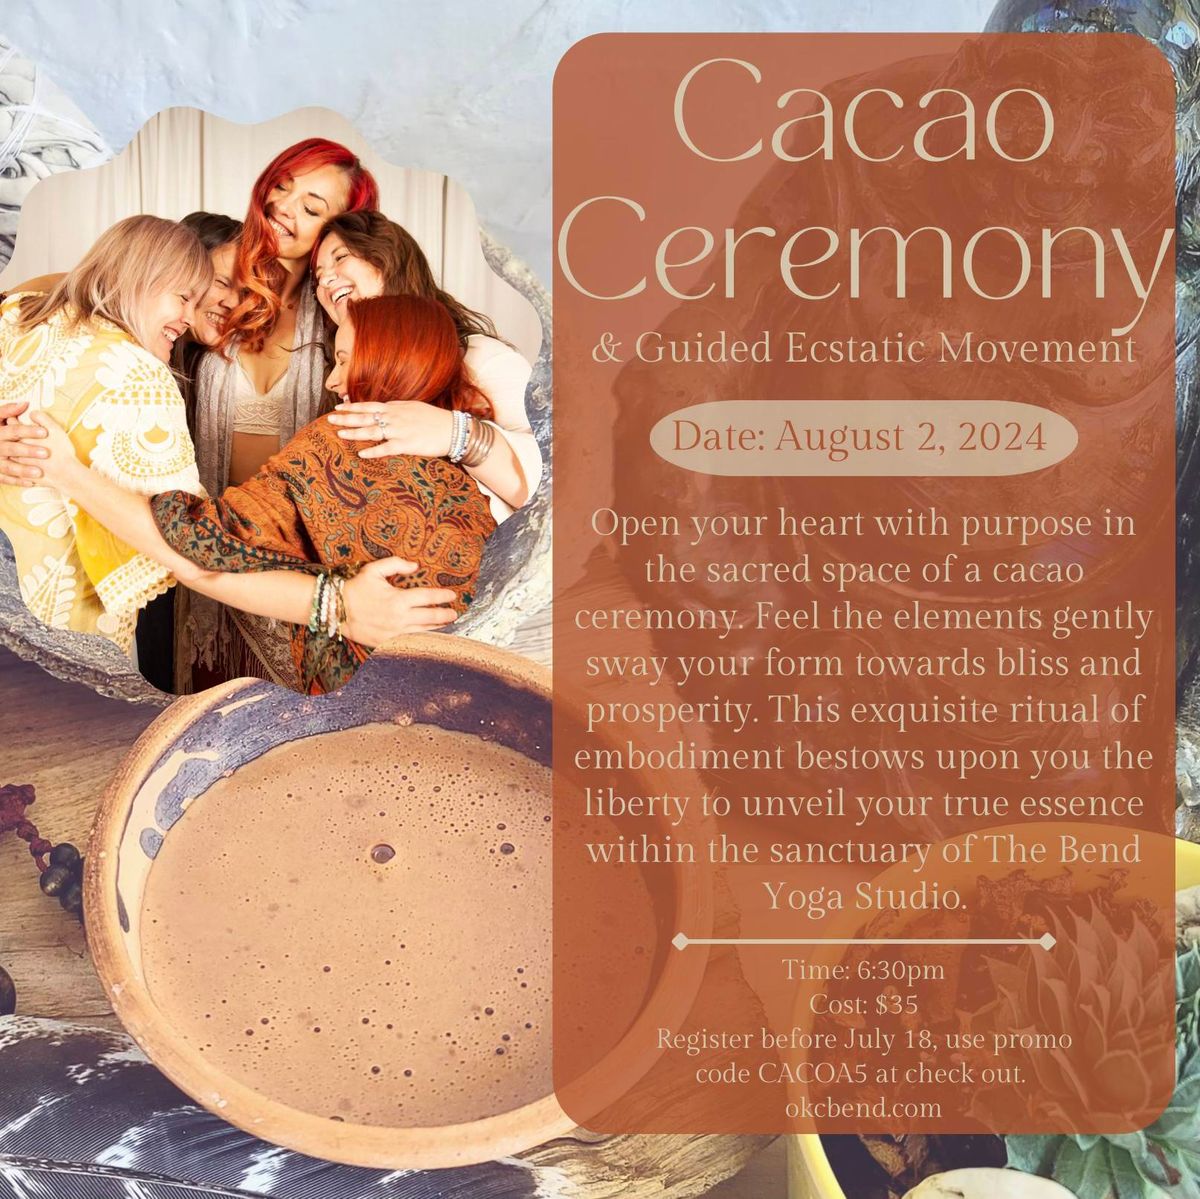 Cacao Ceremony & Guided Ecstatic Movement